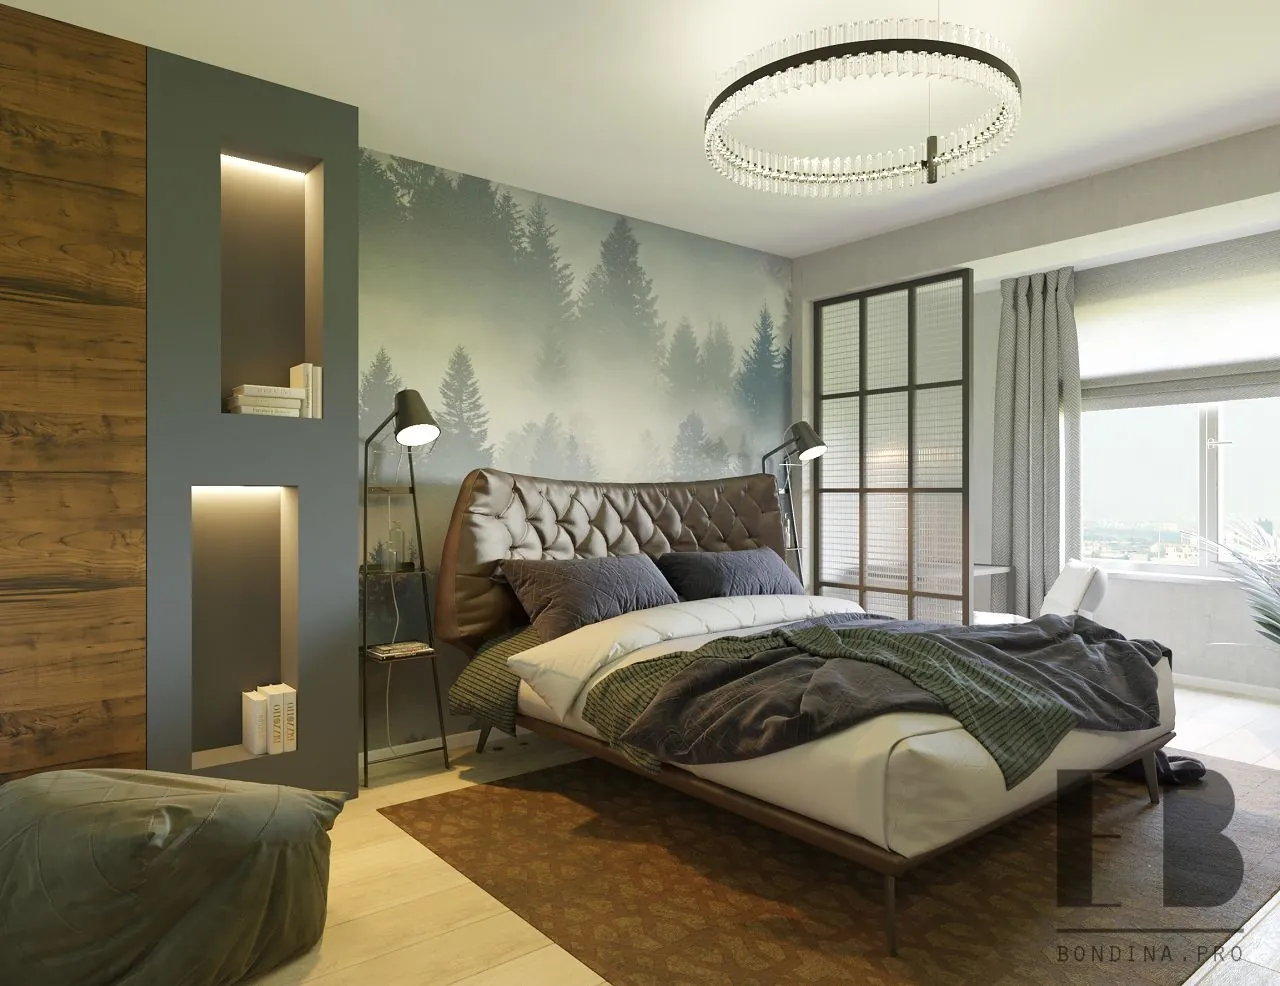 Unusual master bedroom design with a forest picture on the wall